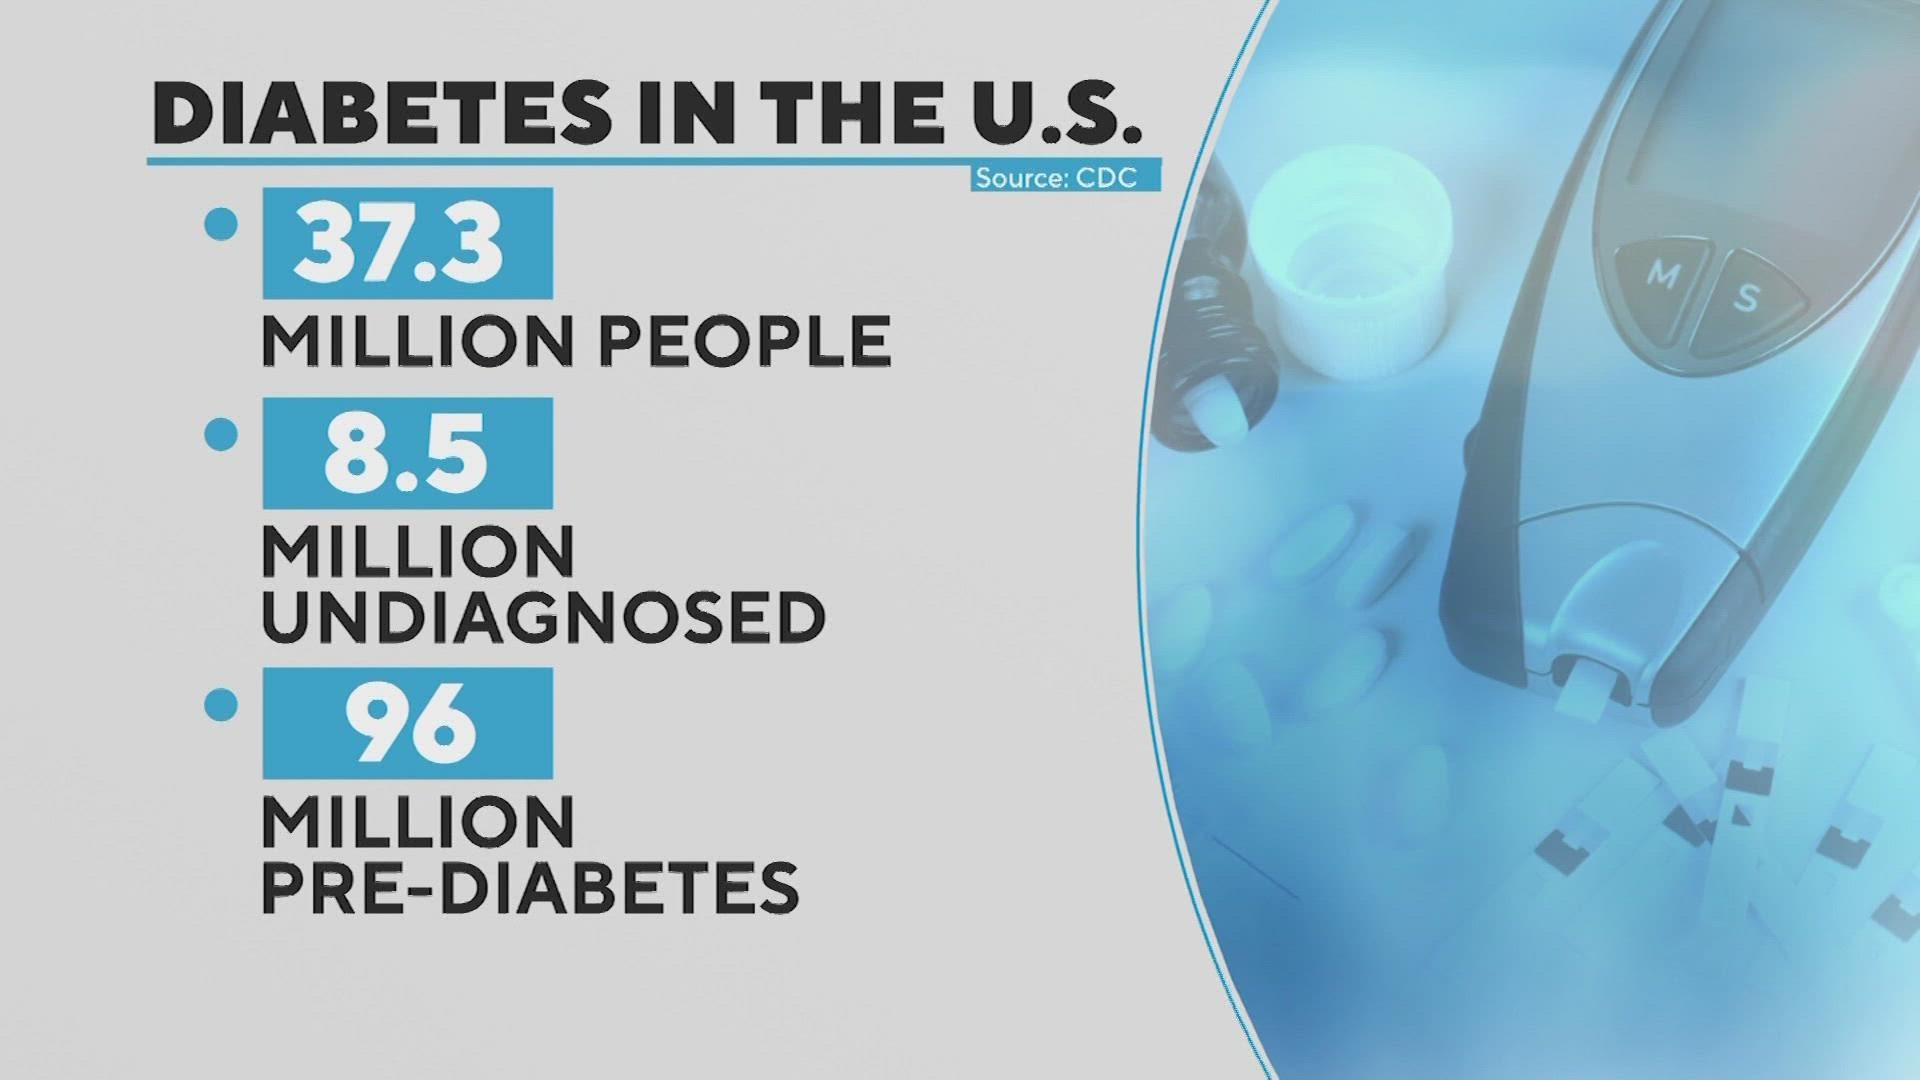 Monday is World Diabetes Day, created to raise awareness about the disease and the millions at risk. There are several programs that alert people to the dangers.